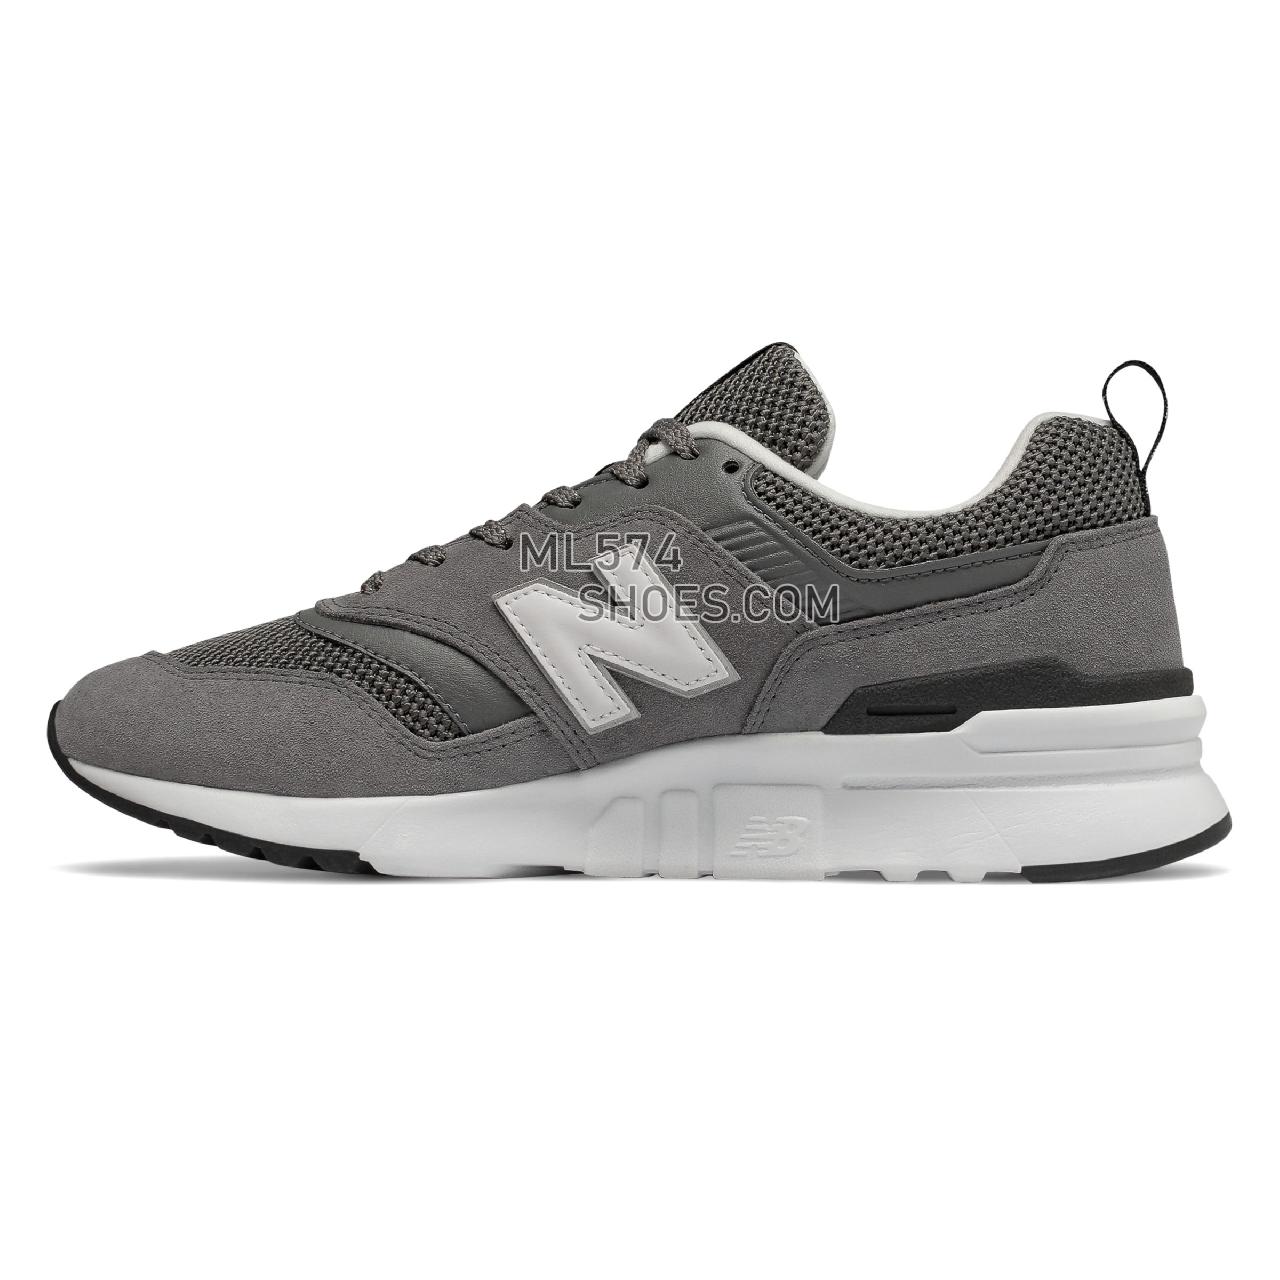 New Balance 997H - Women's Classic Sneakers - Castlerock with White - CW997HAC